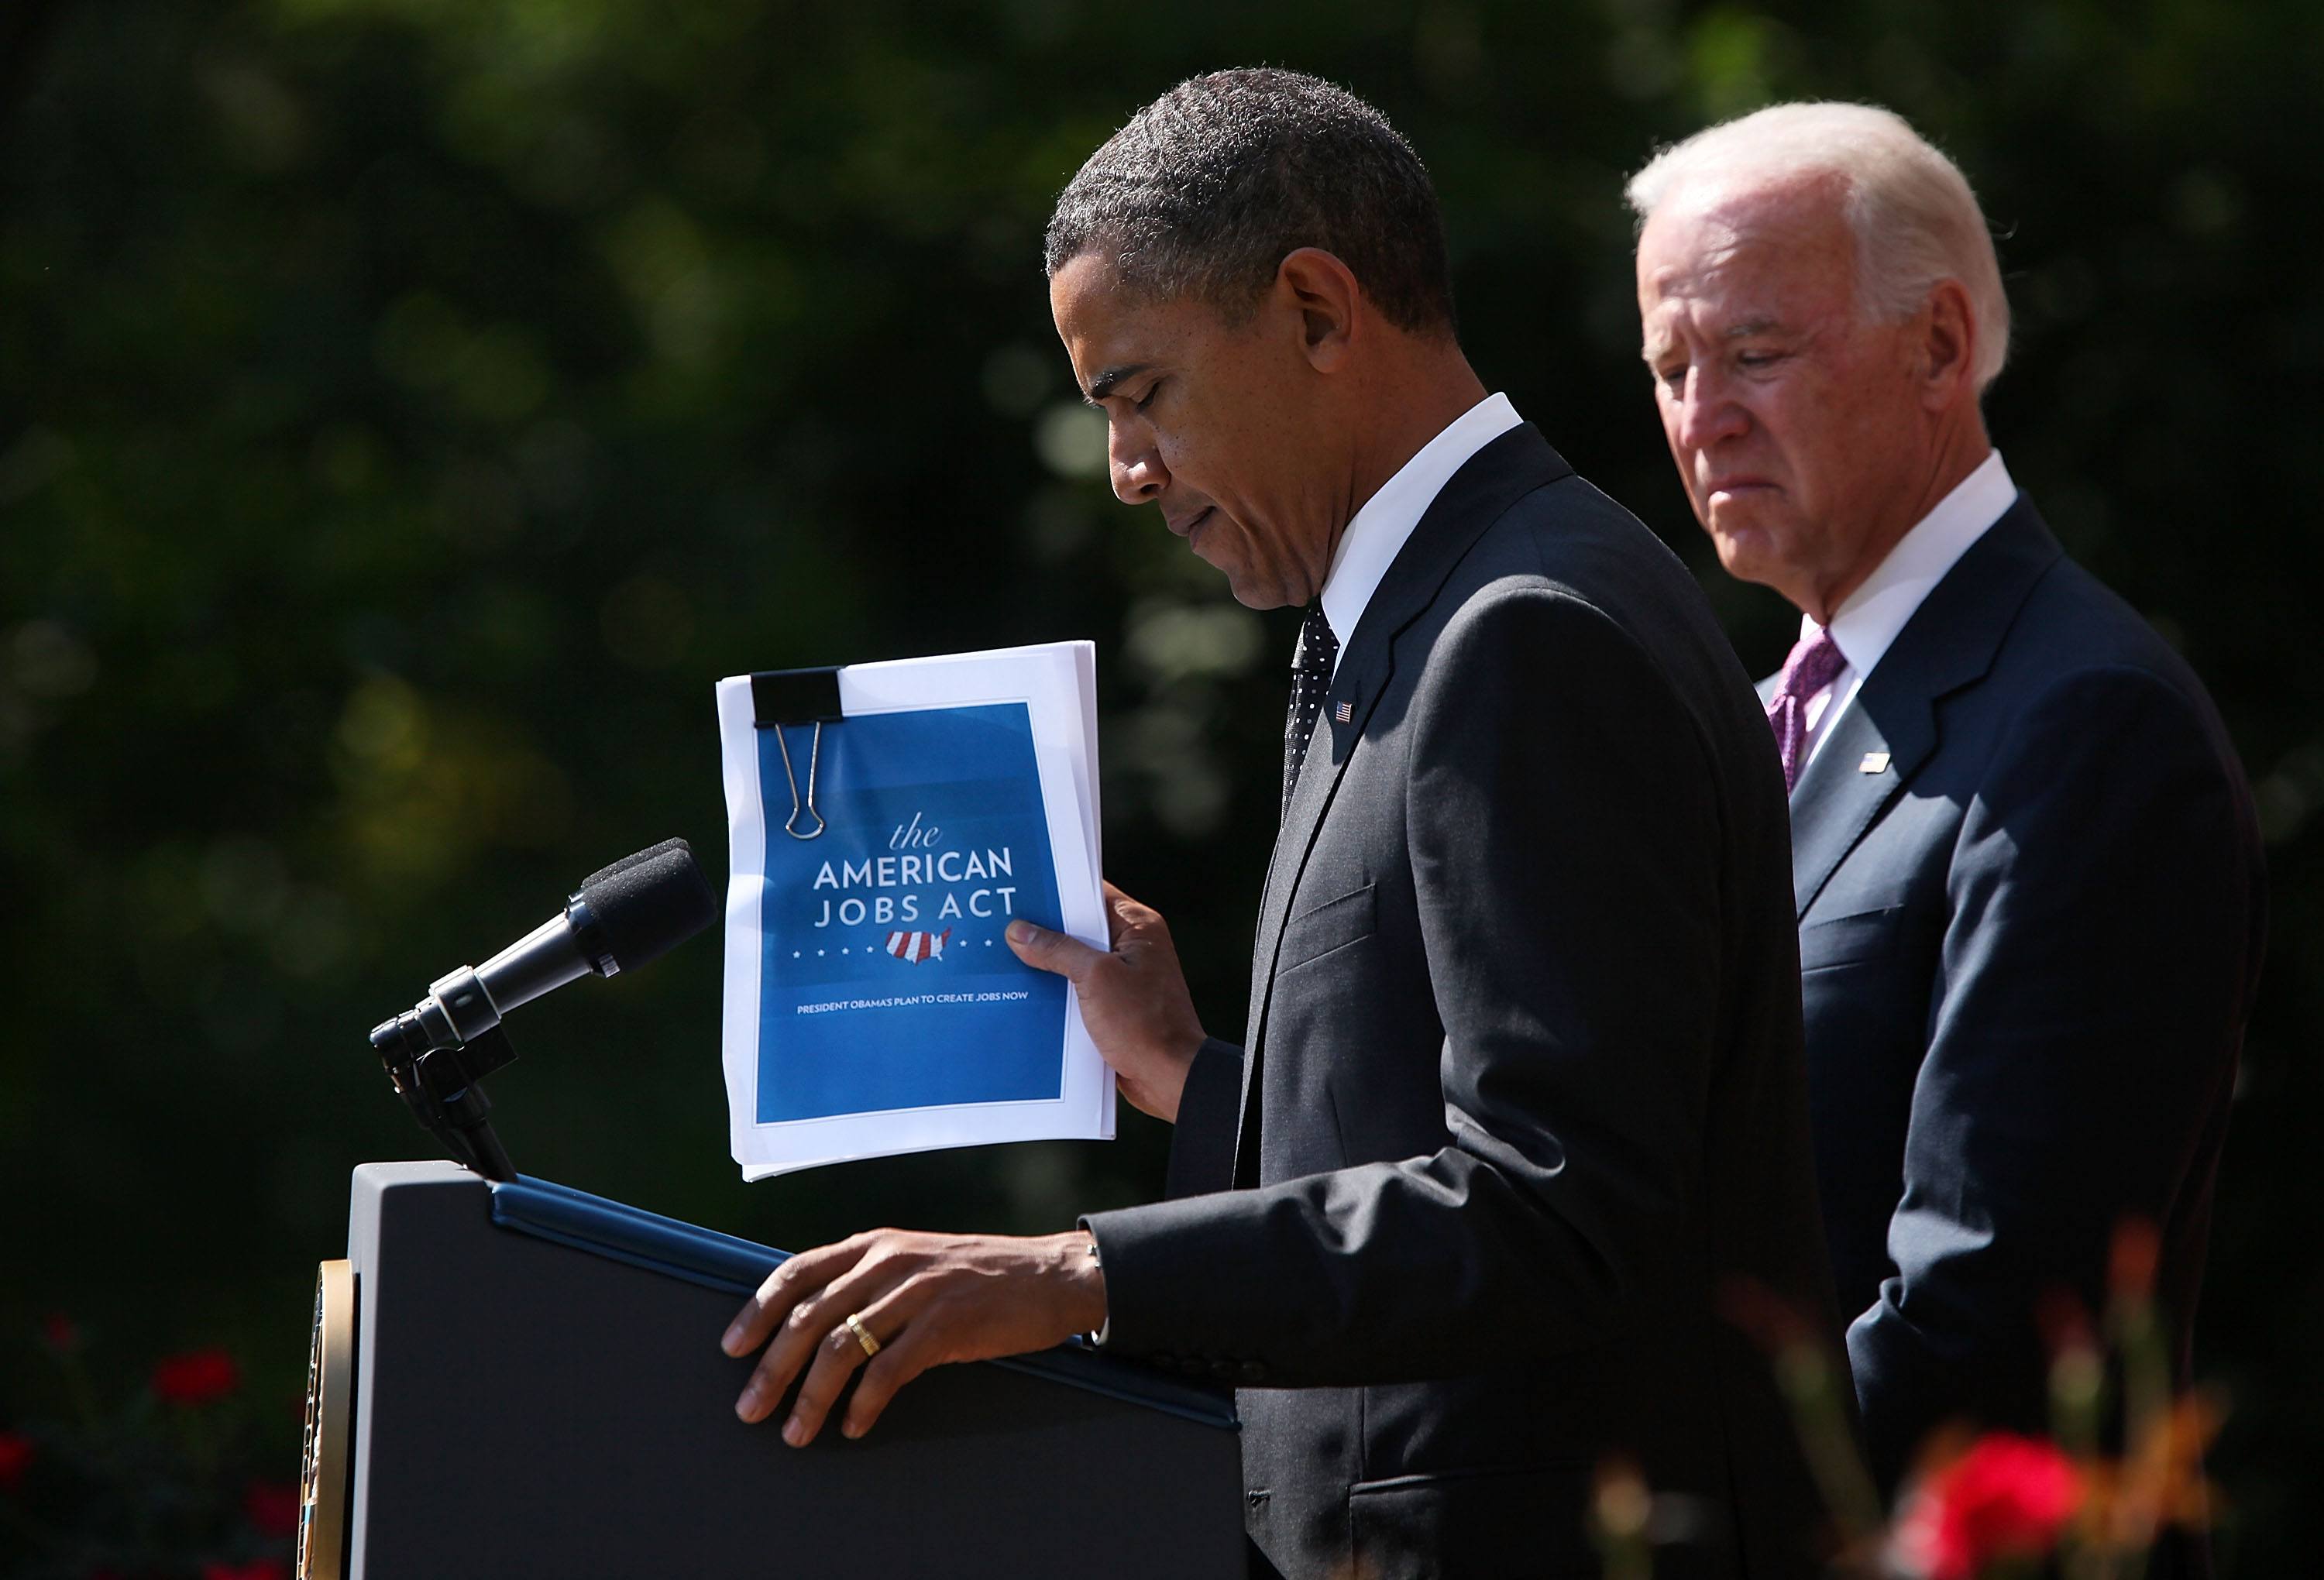 U.S. President Barack Obama holds up a copy of his $400 billion jobs plan he is sending to Congress as Vice President Joseph Biden stands next to him